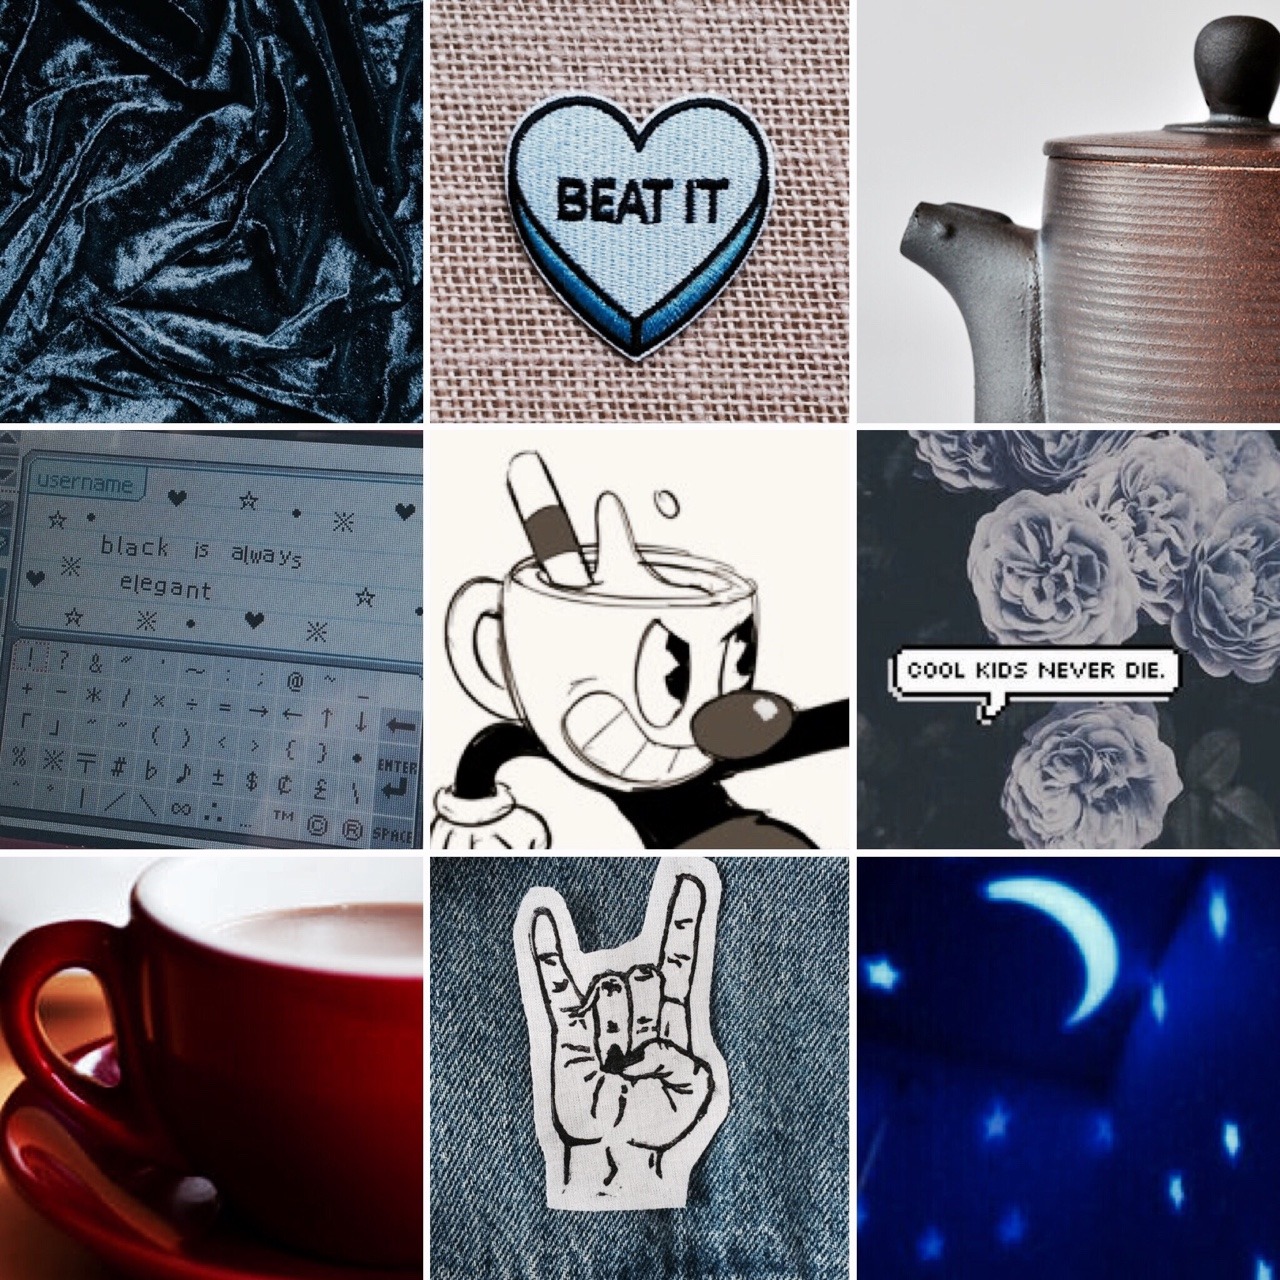 "Dont deal with the devil" — aesthetic for an"edgy" mugman art x -Mod...